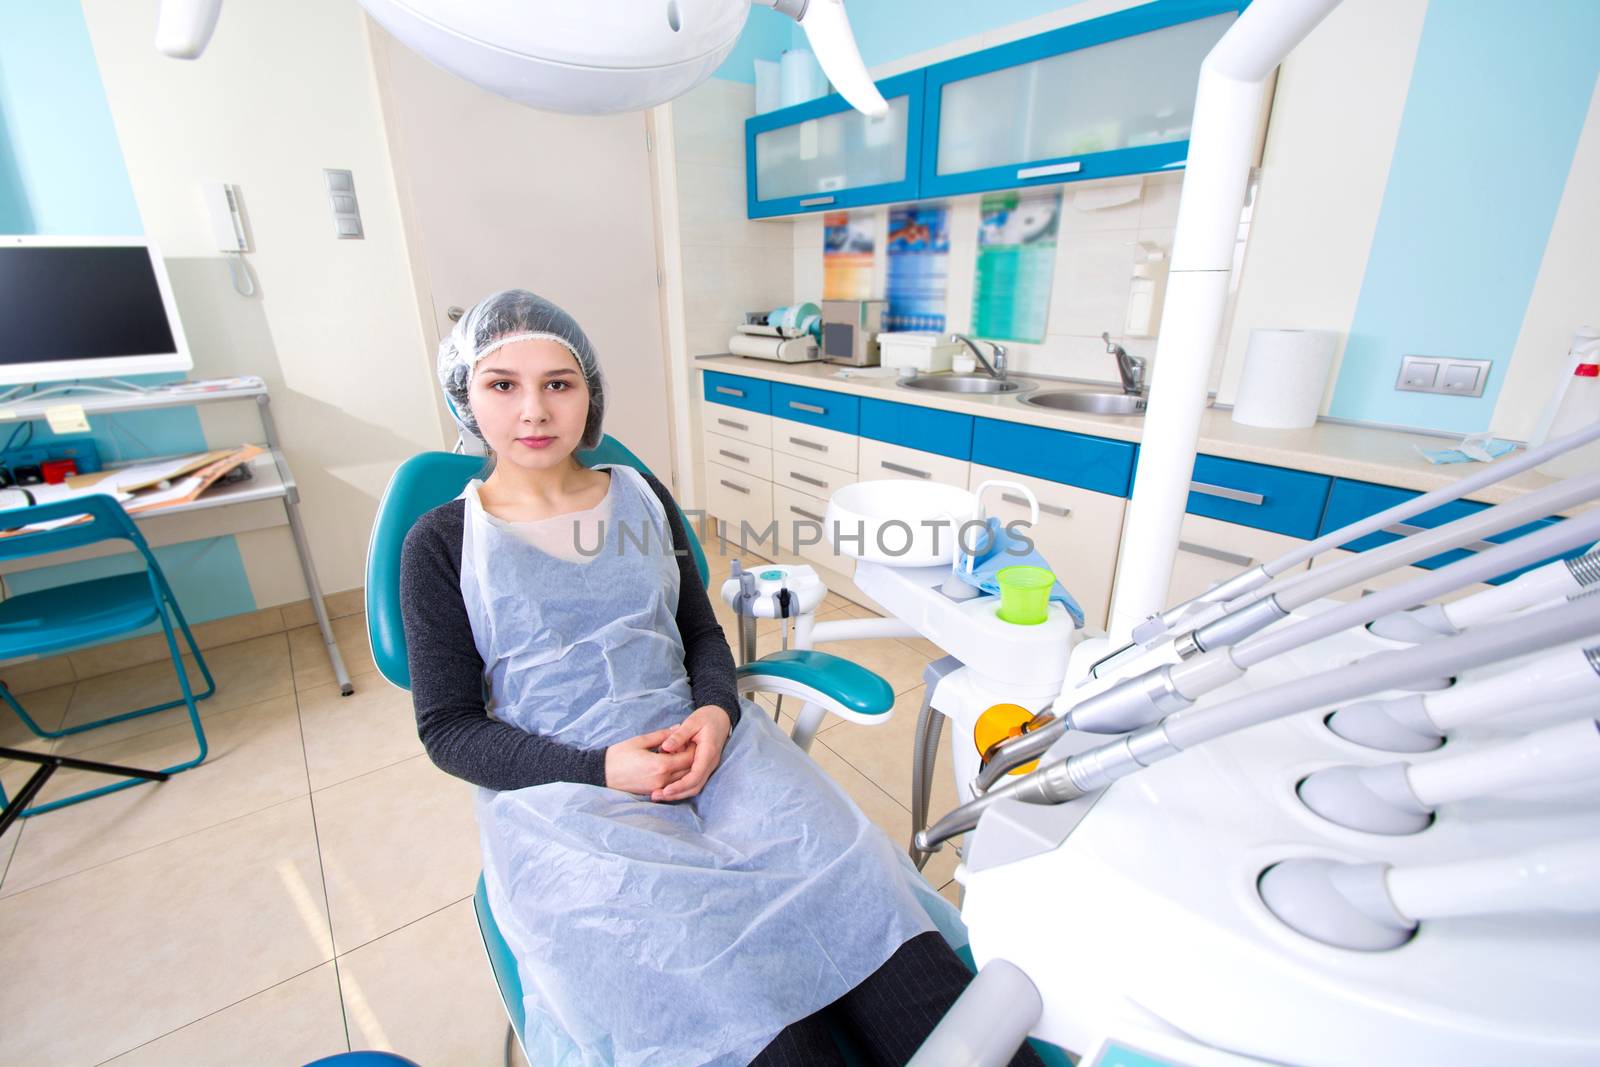 Female patient waiting for dental treatment in a dental chair. Dental Hygiene and Health conceptual image.